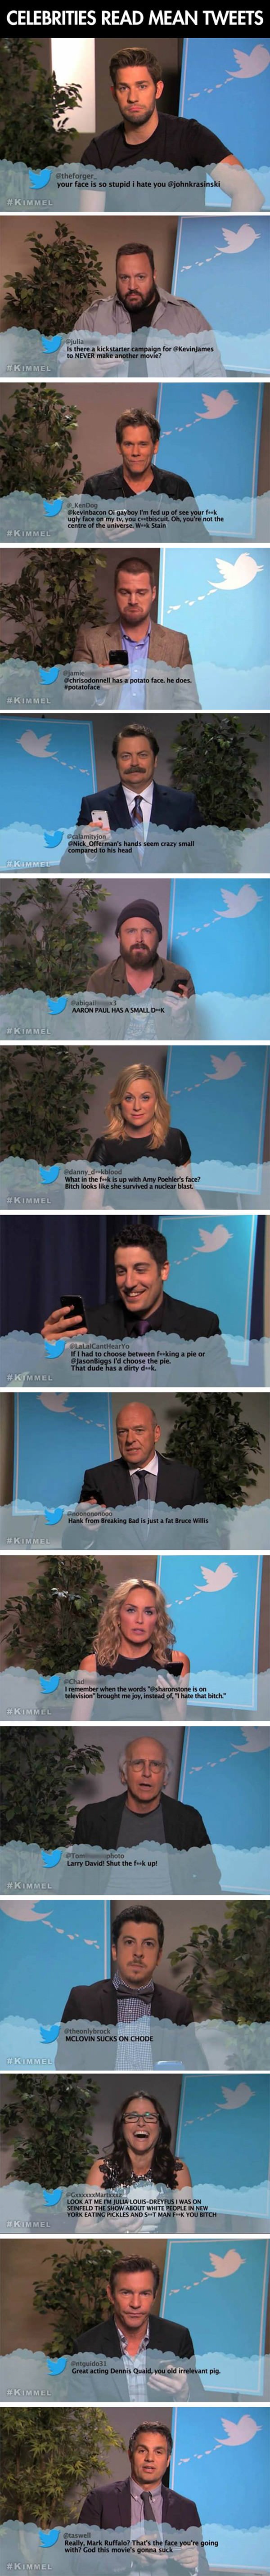 Celebs Reading Mean Tweets funny picture